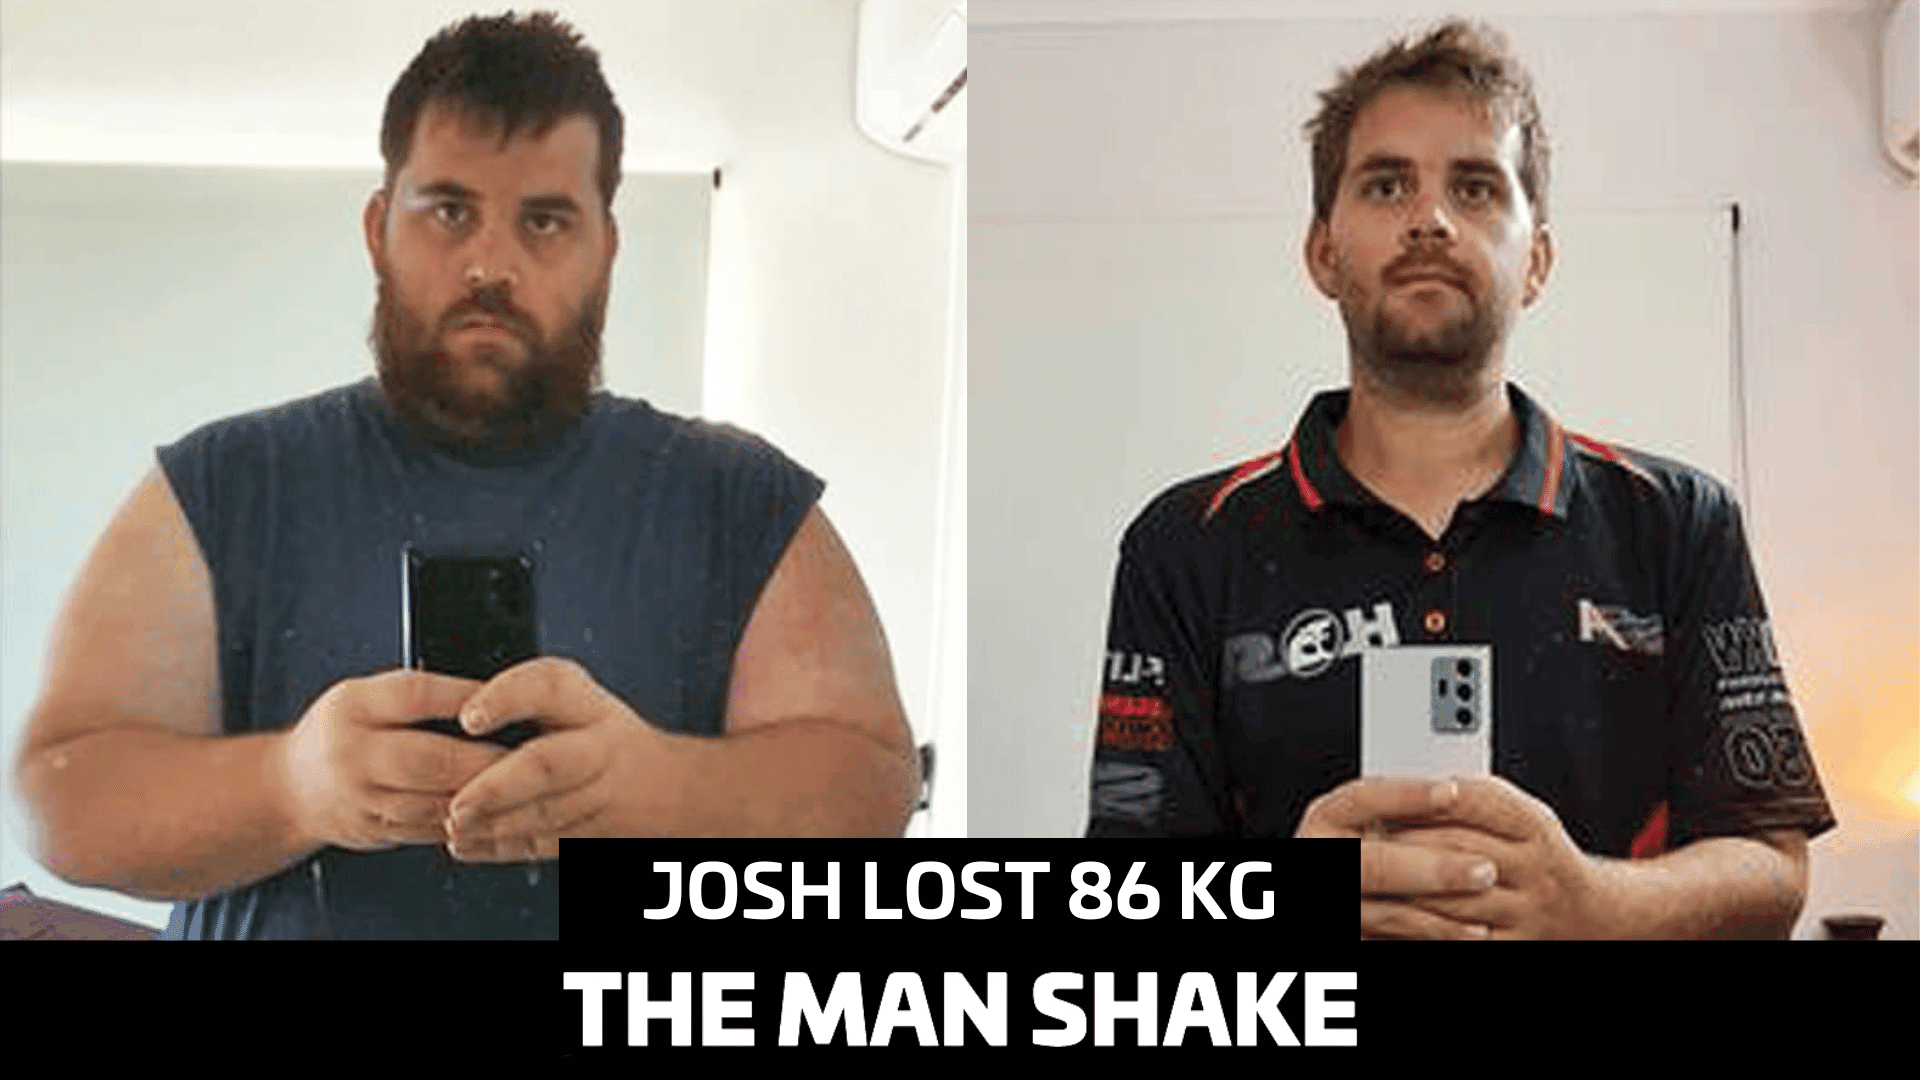 Josh Lost a whopping 86kg in 10 months!